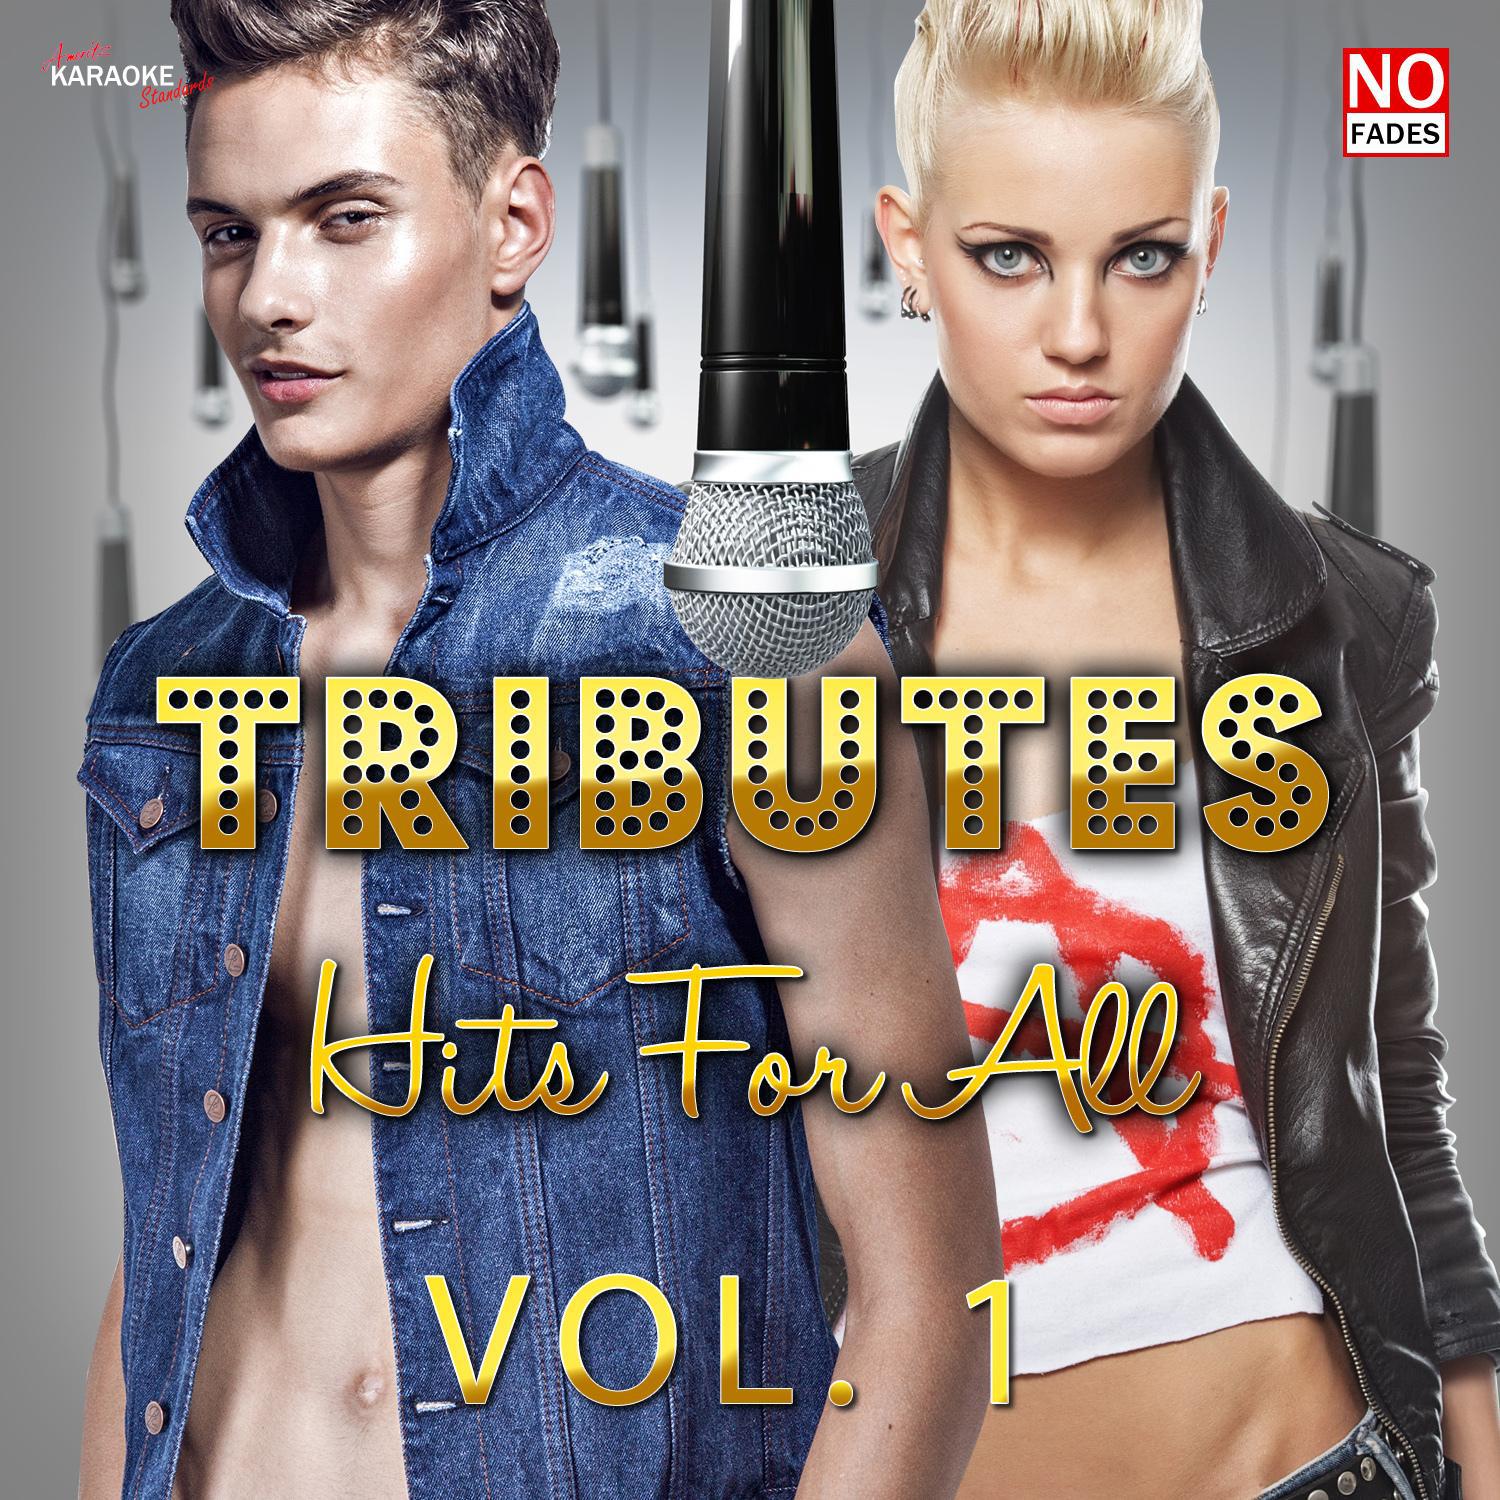 Tributes - Hits for All Vol. 1